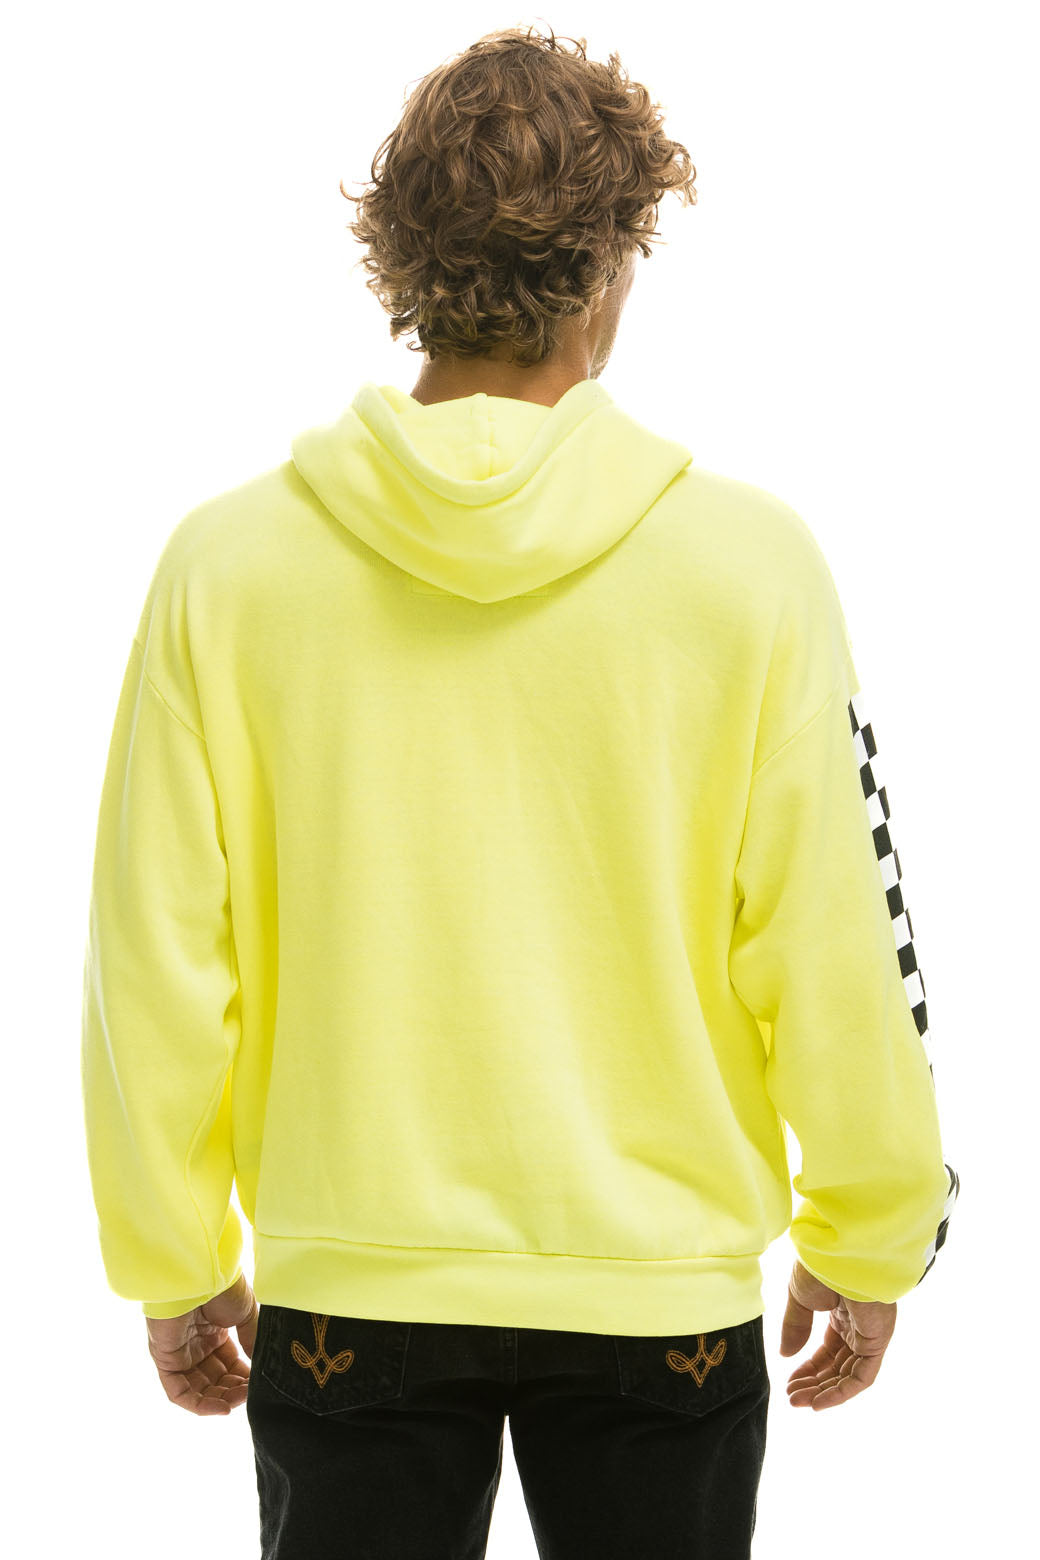 RELAXED CHECK SLEEVE PULLOVER HOODIE - NEON YELLOW Hoodie Aviator Nation 